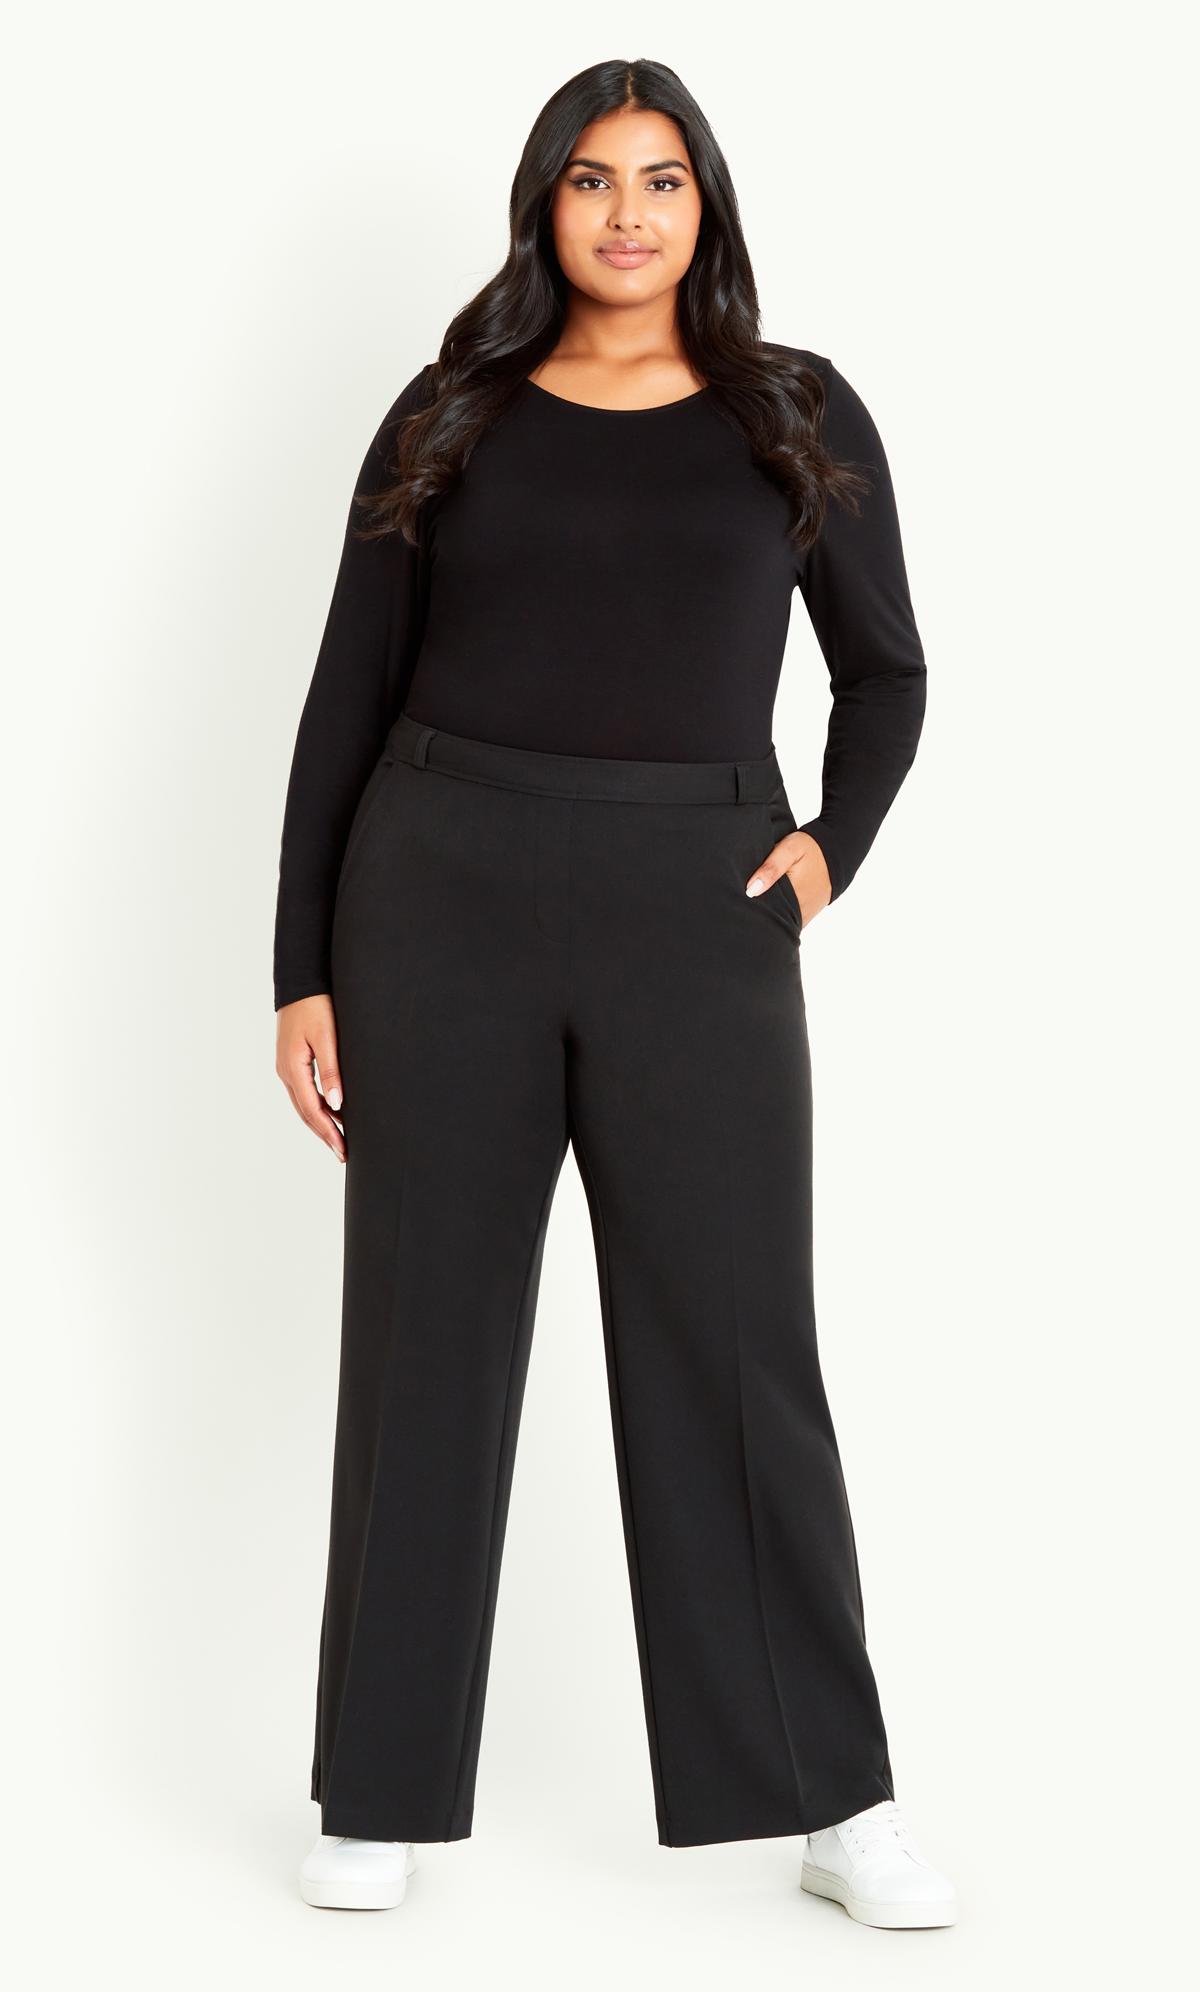 Black Loose Trousers with Big Pockets